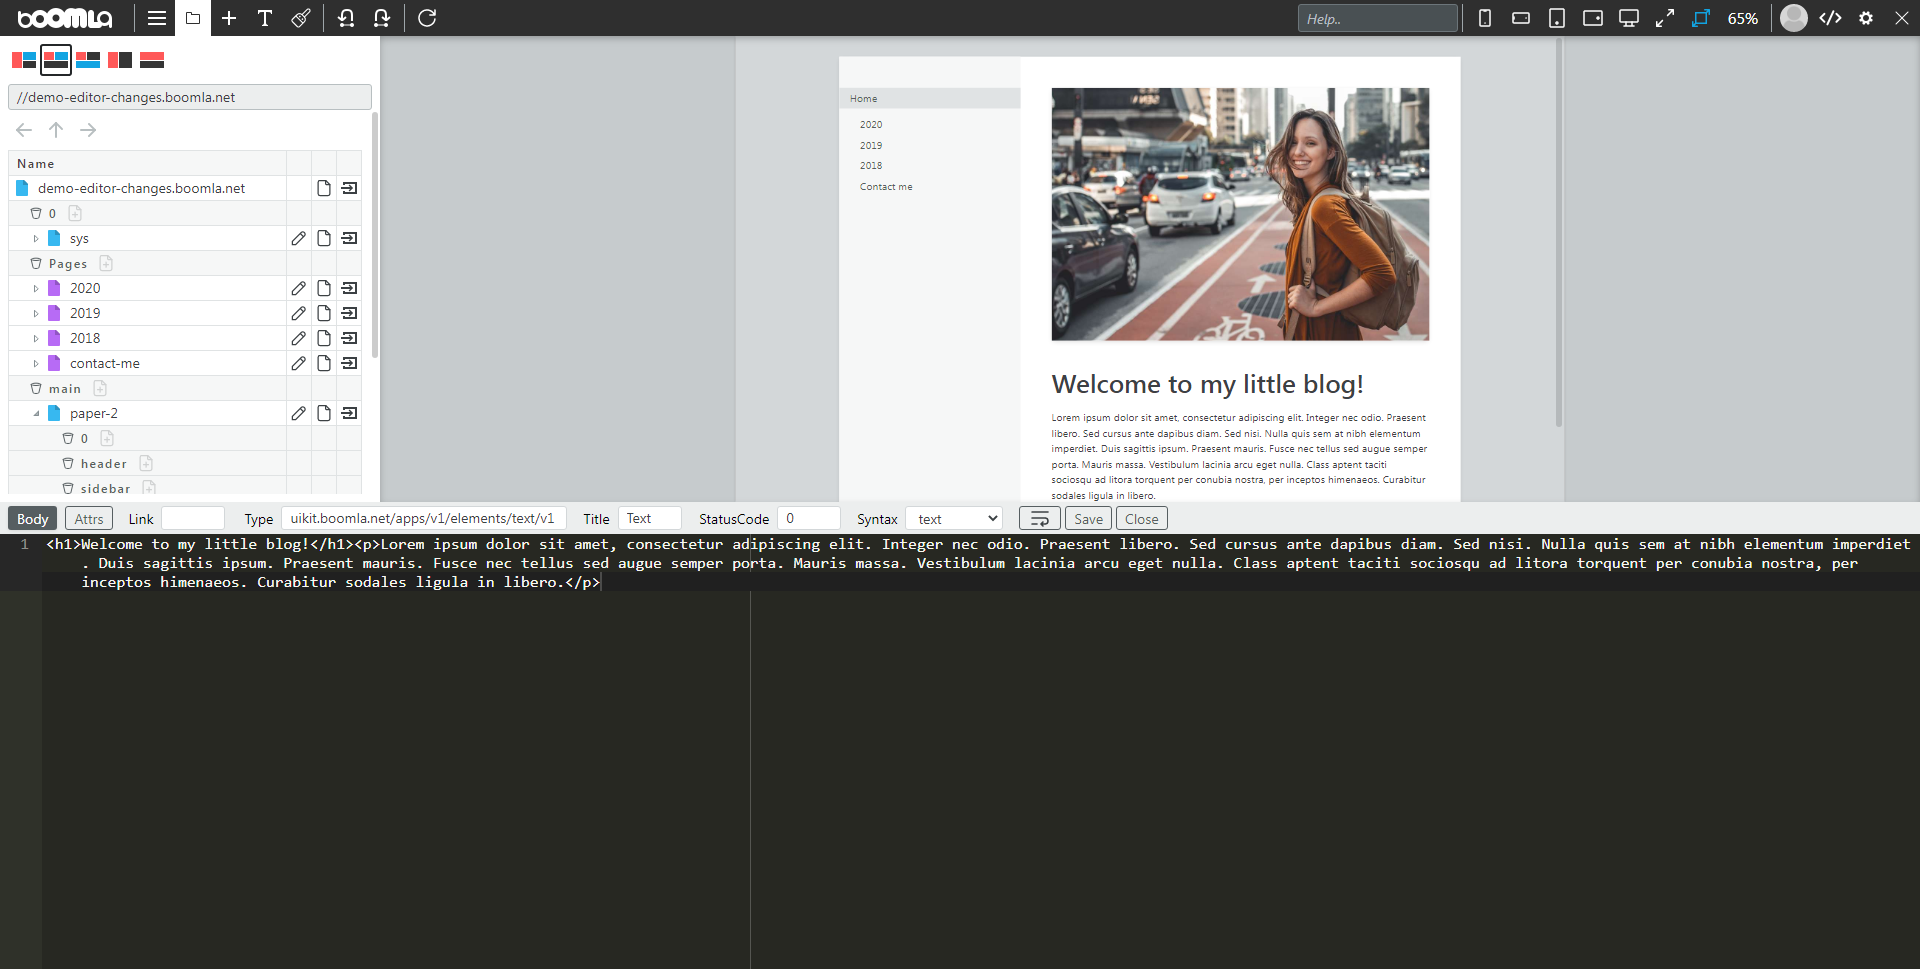 new-object-editor-with-code-editor-layout-2.png